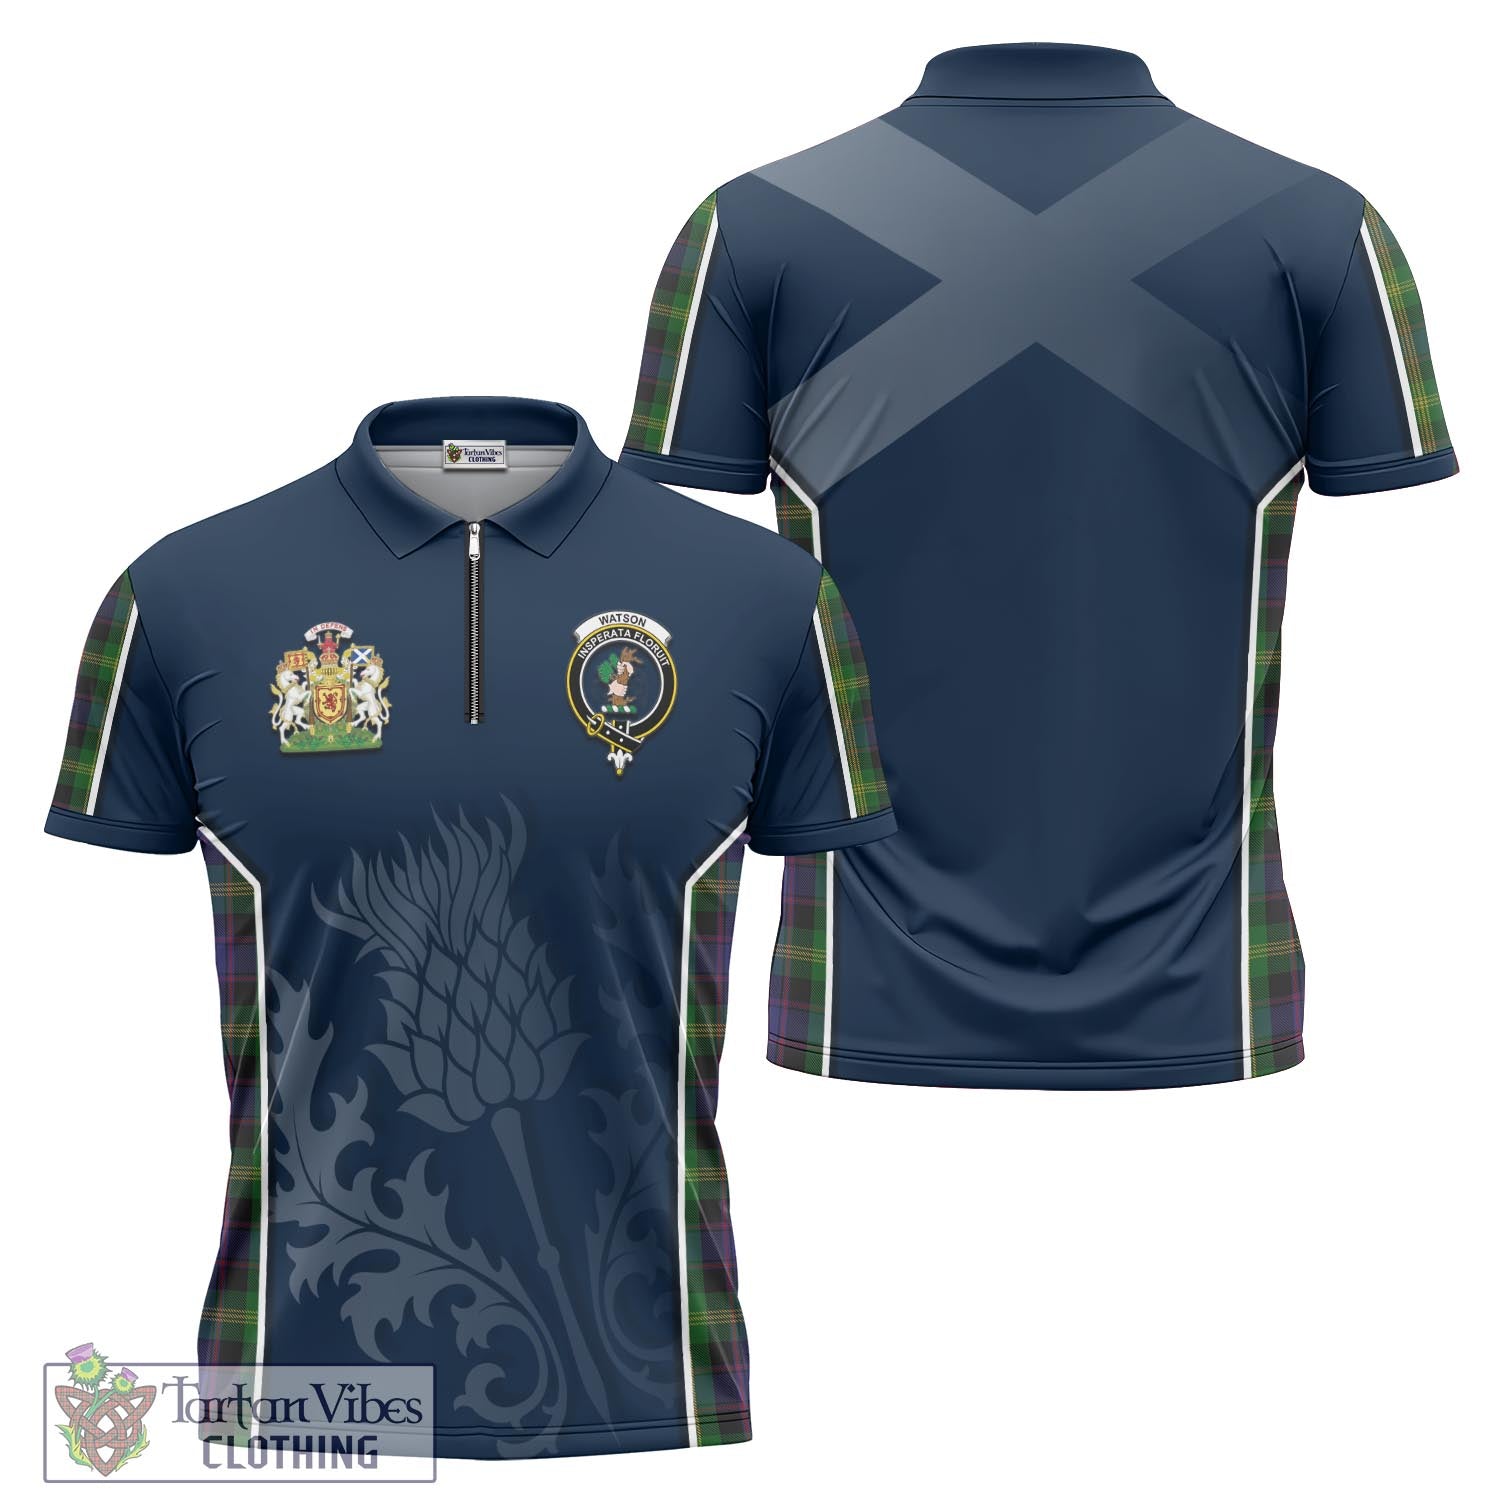 Tartan Vibes Clothing Watson Tartan Zipper Polo Shirt with Family Crest and Scottish Thistle Vibes Sport Style